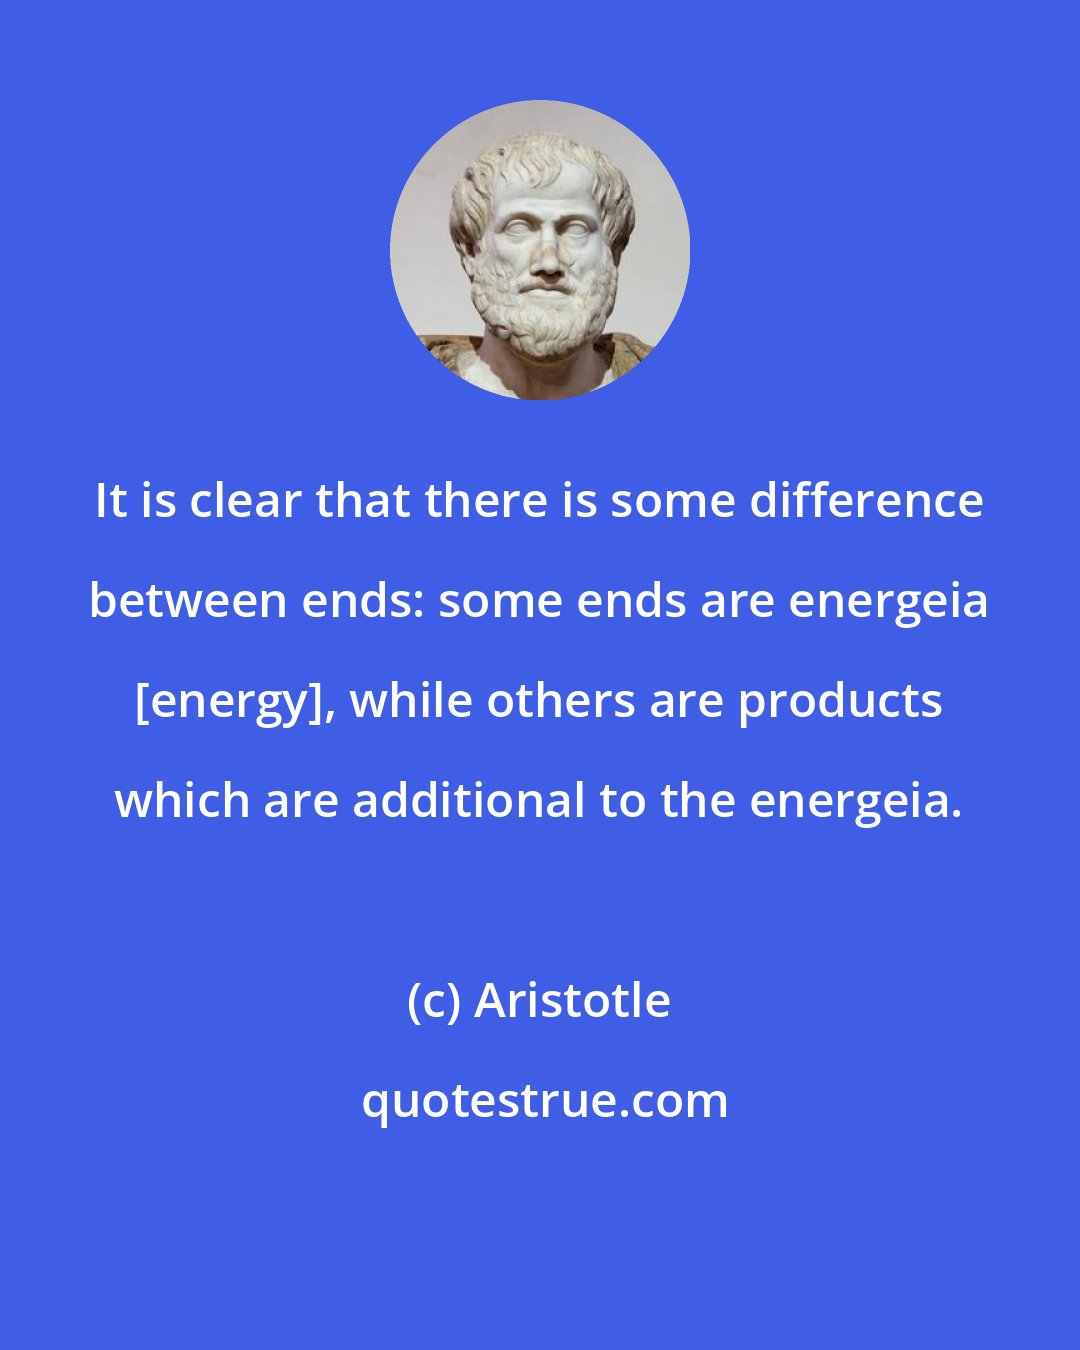 Aristotle: It is clear that there is some difference between ends: some ends are energeia [energy], while others are products which are additional to the energeia.